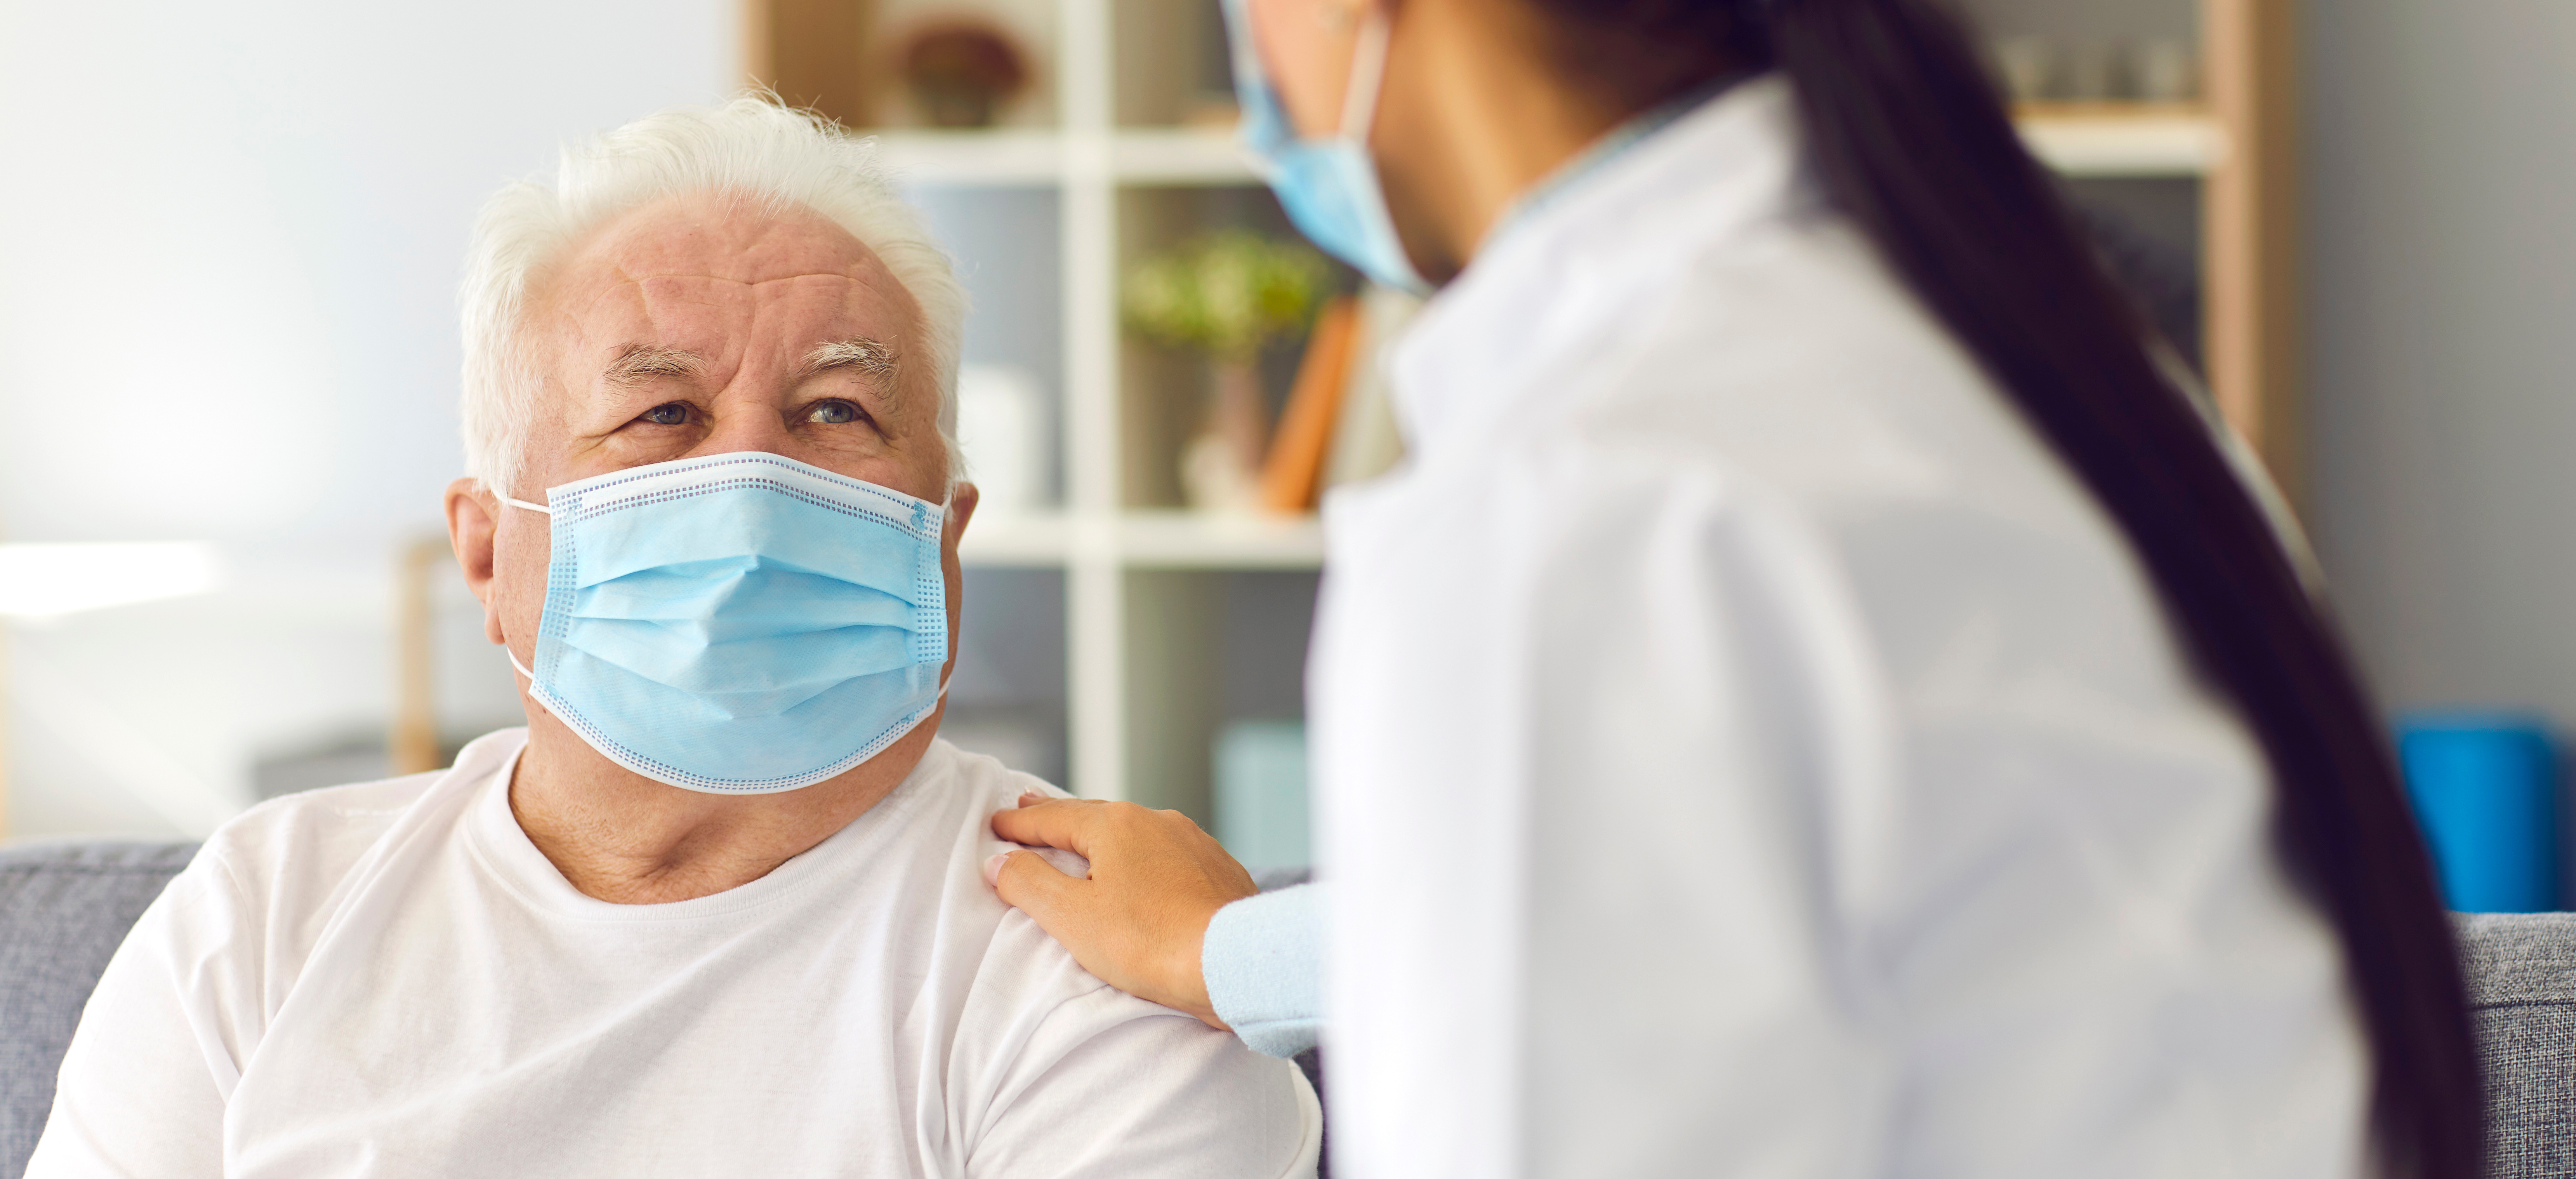 Doctor visiting senior patient at home during period of seasonal infection or Covid 19 pandemic